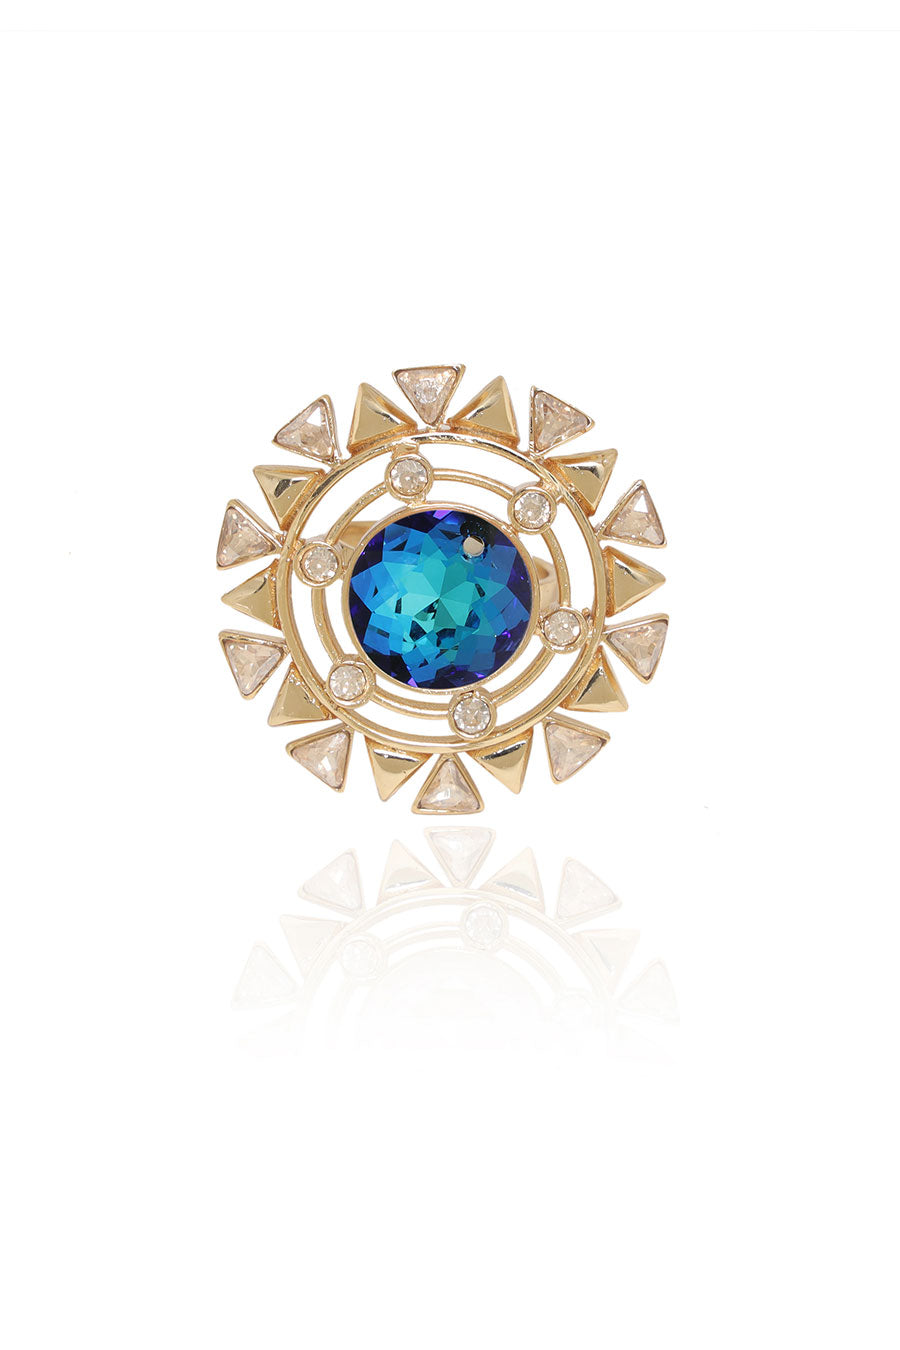 Blooming Daisy - Blue Swarovski Cocktail Ring